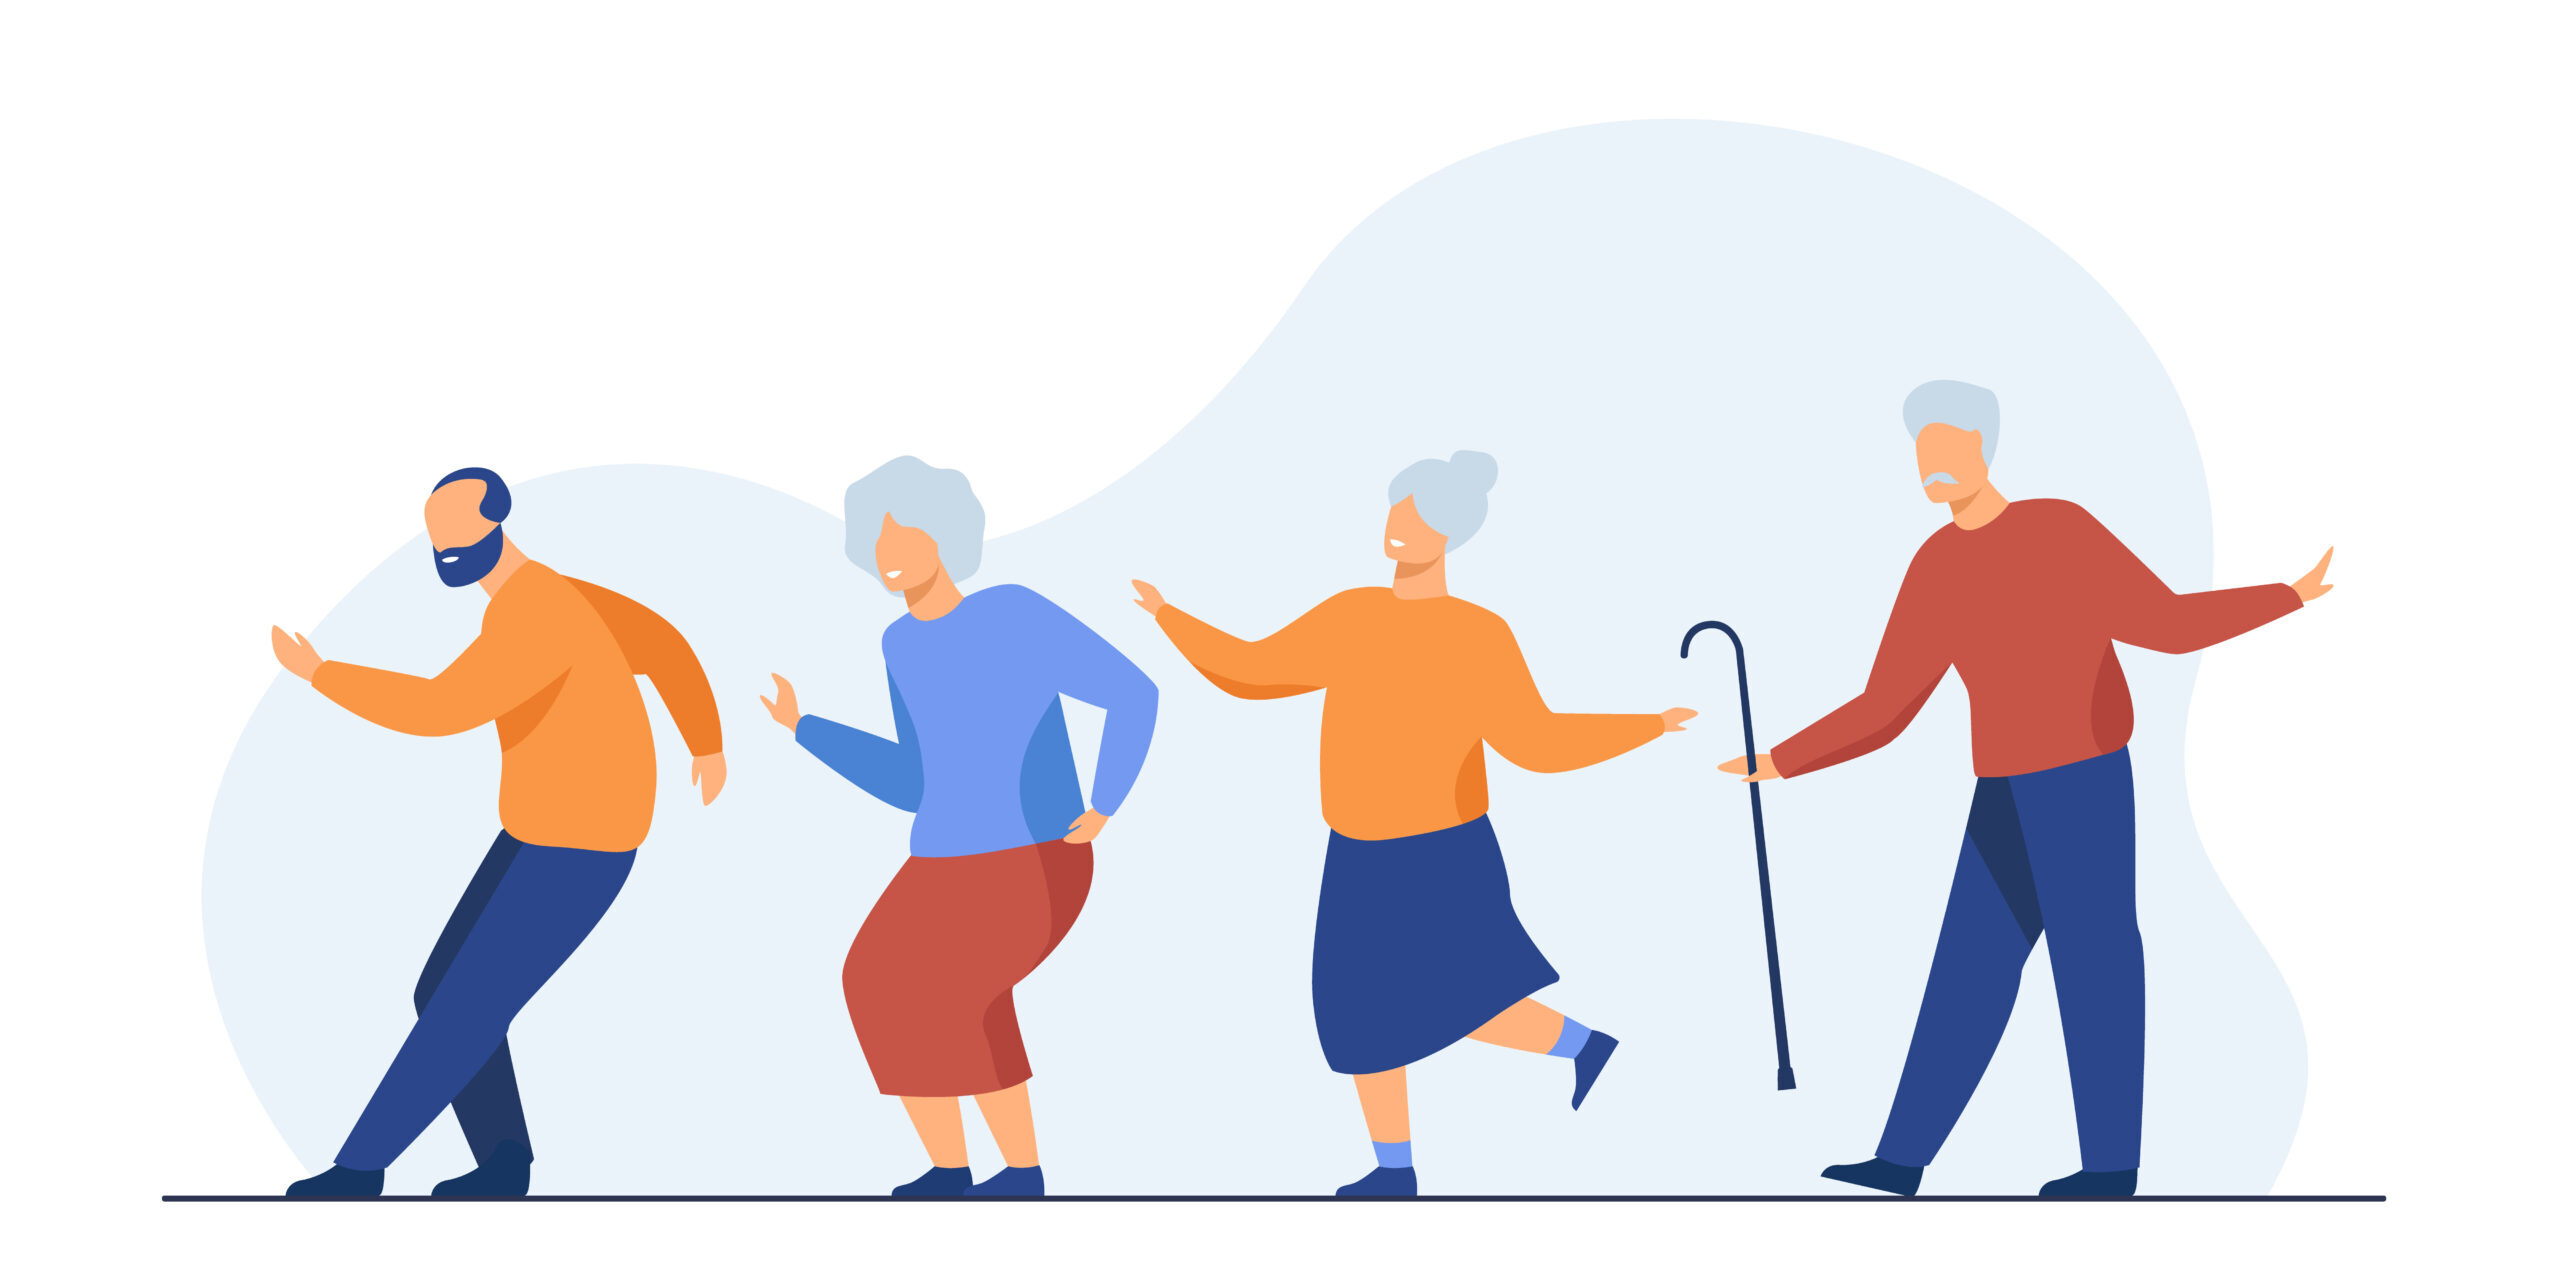 Happy senior people dancing at party. Cartoon grey haired old men and women enjoying music in club, having fun . Vector illustration for age, hobby, joy, retirement concept